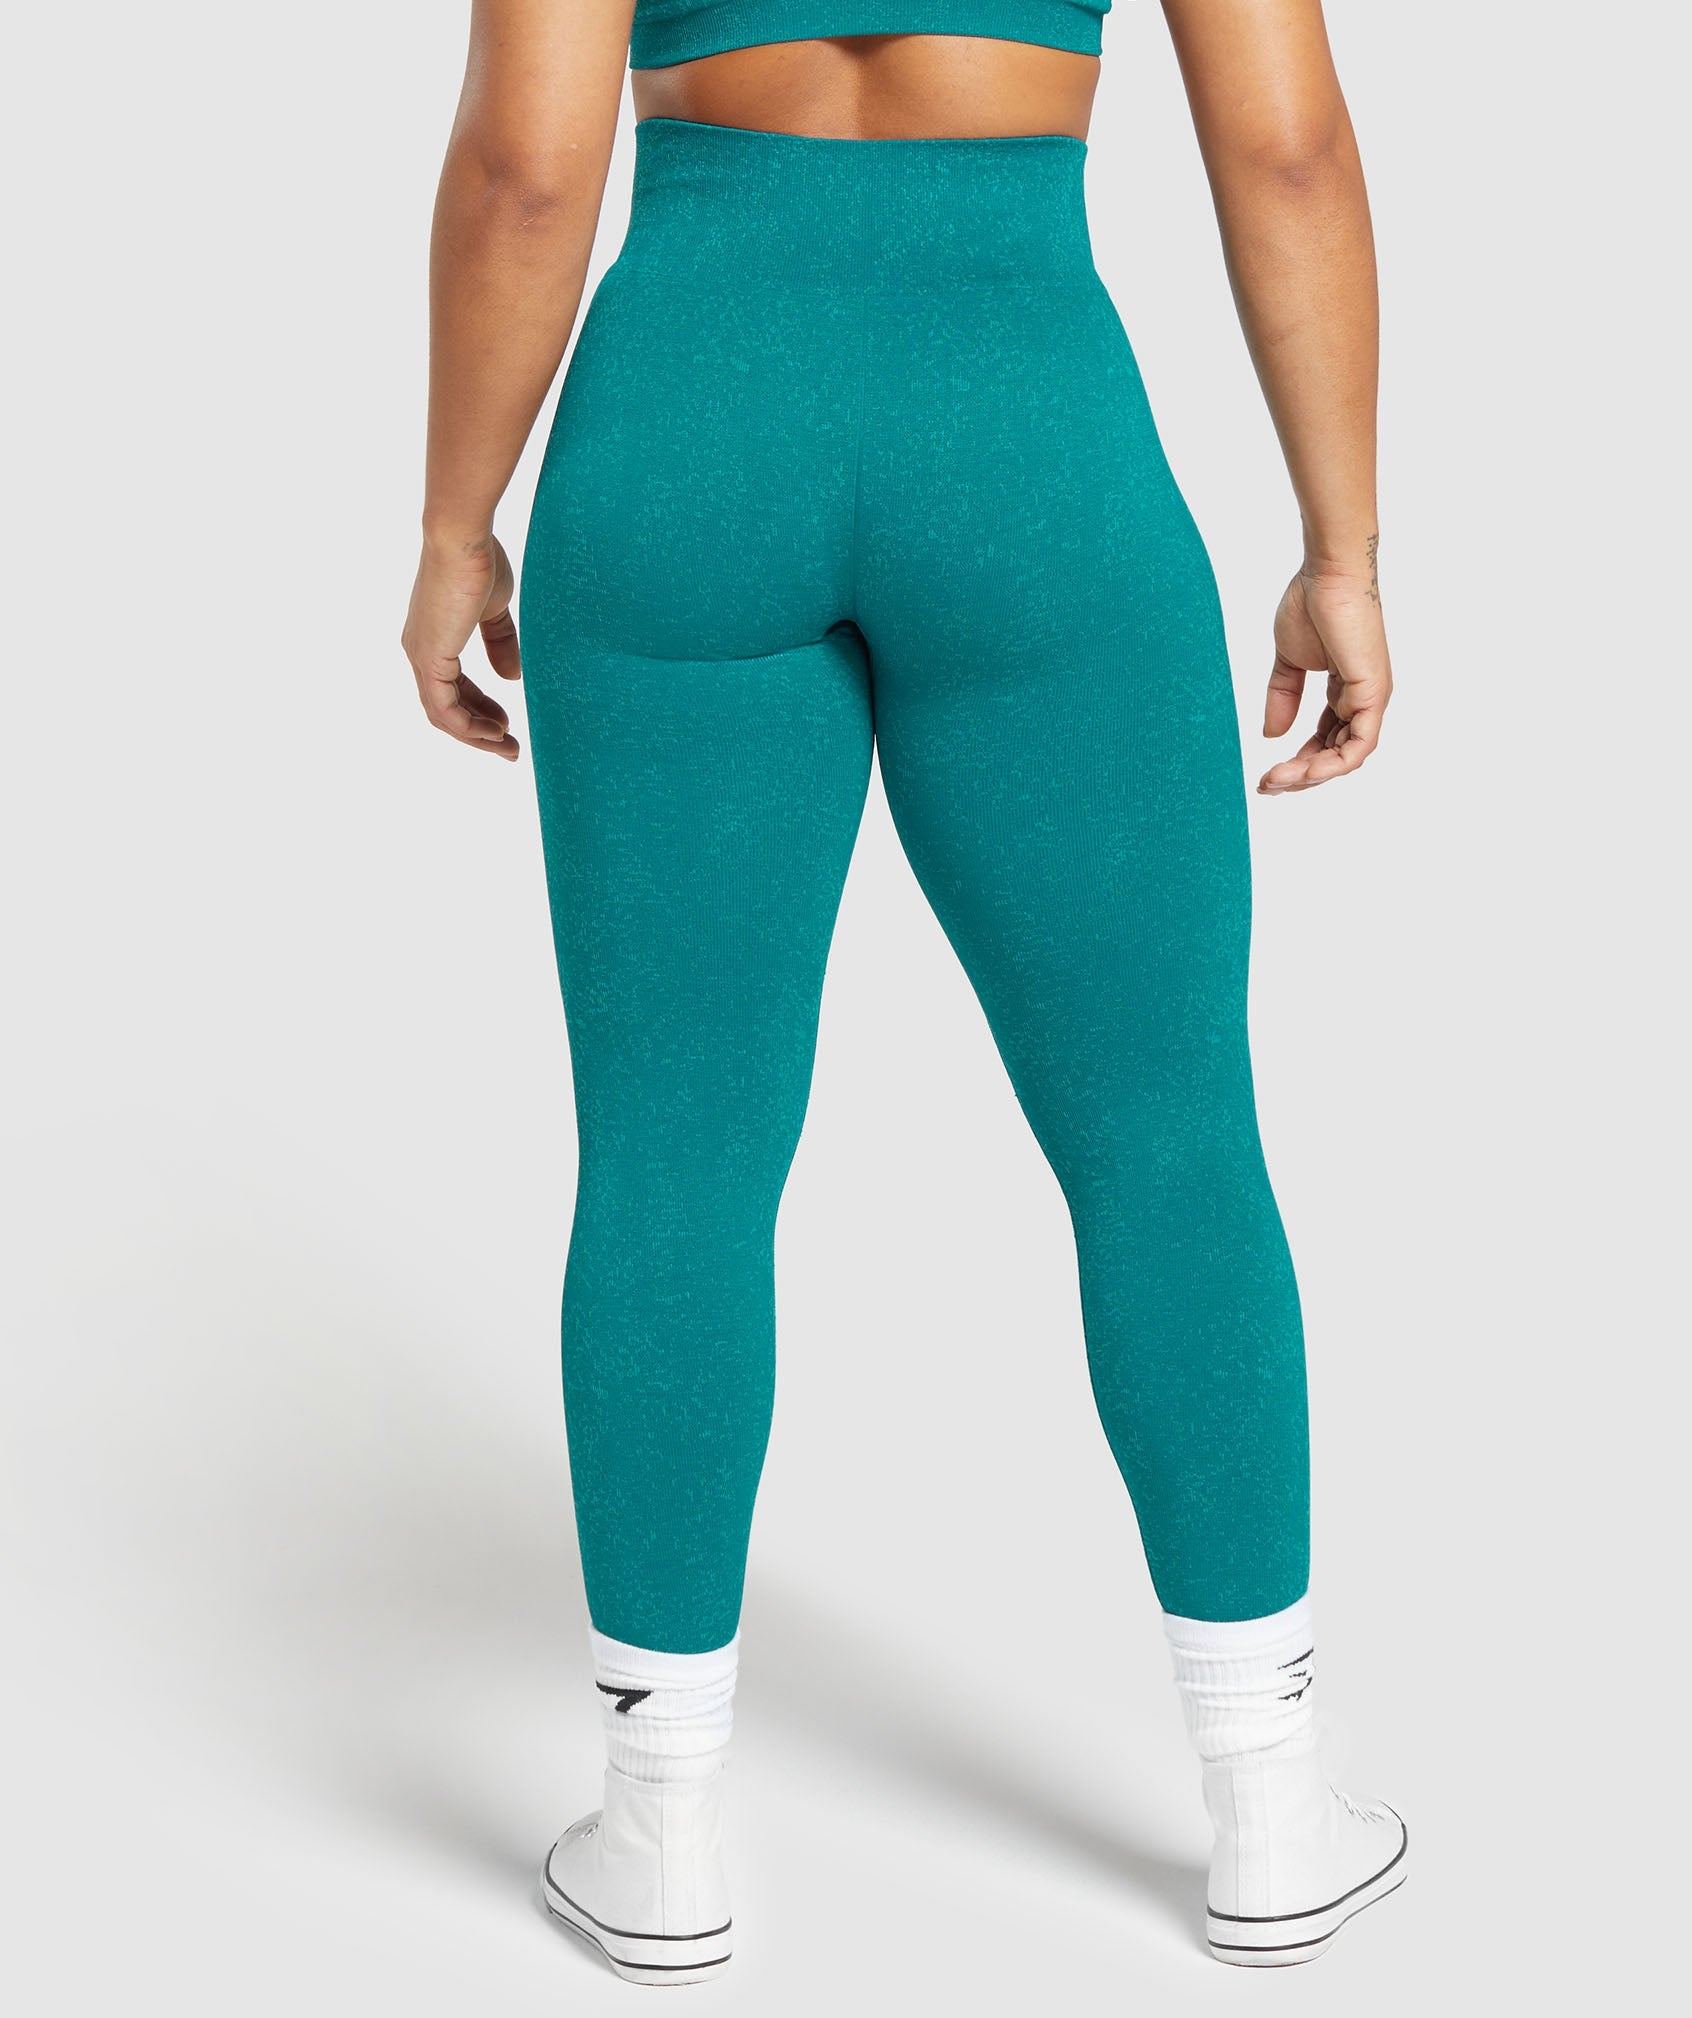 Fleece Lined Leggings One Size – Tempting Teal Boutique